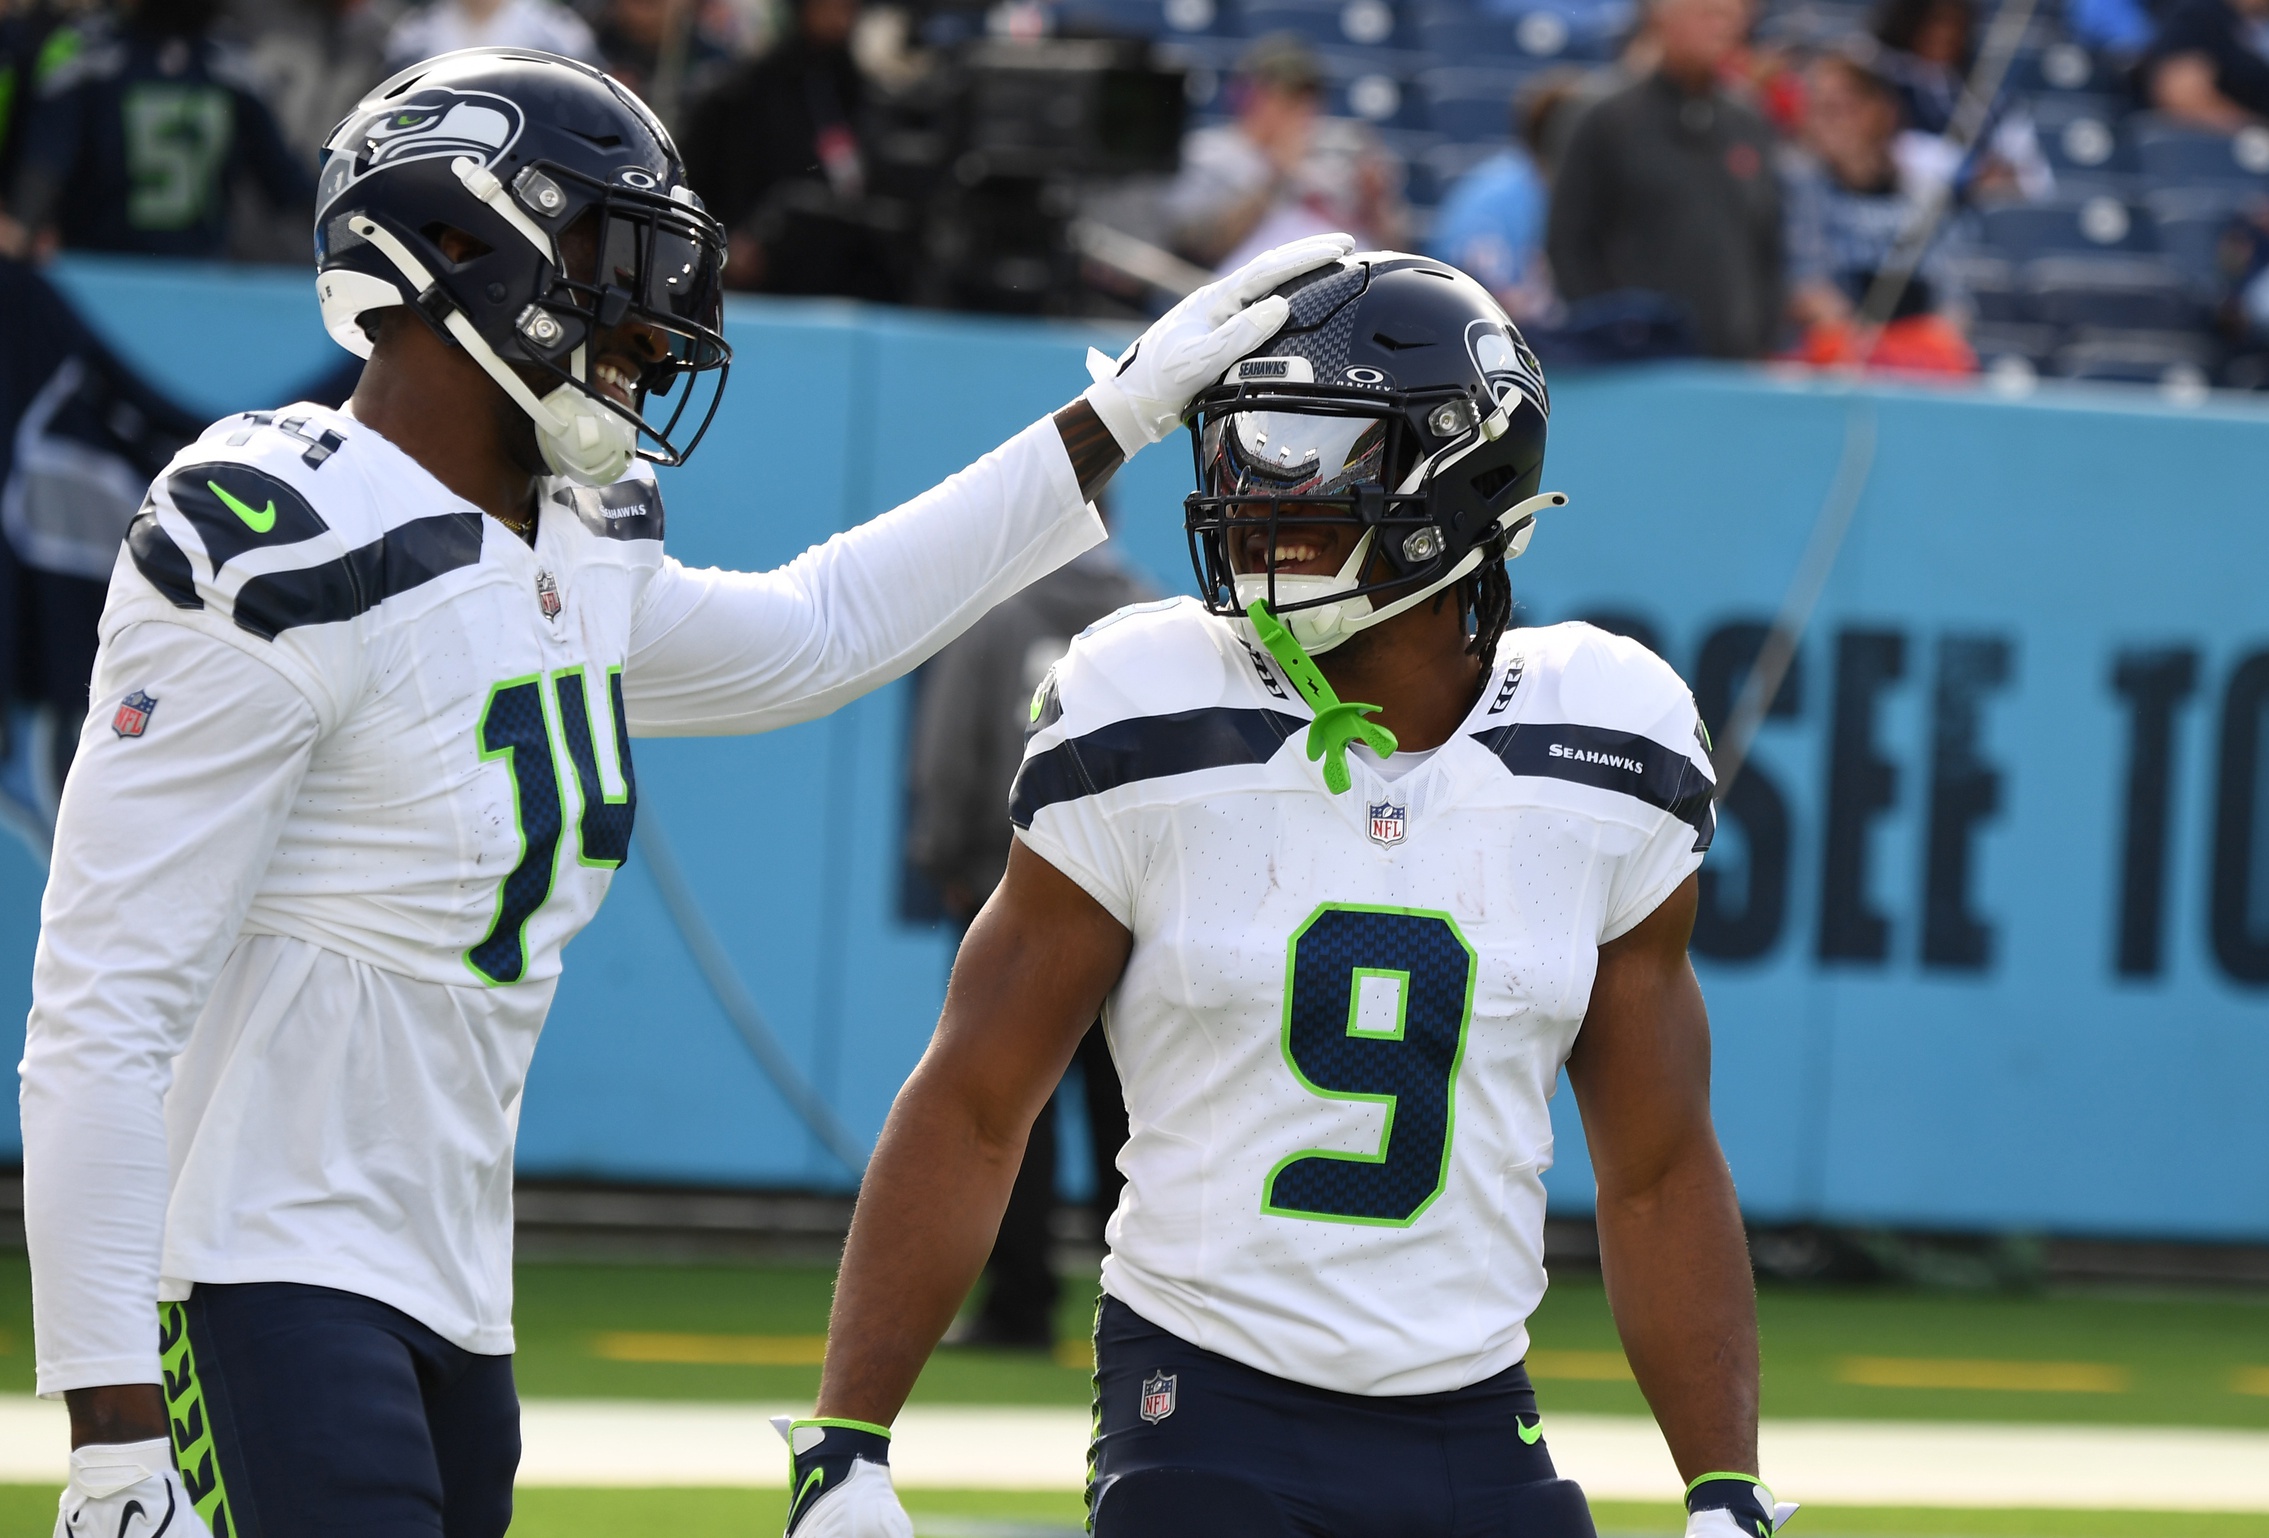 Seattle Seahawks wide receiver DK Metcalf (14) and running back Kenneth Walker III (9) before the game against the Tennessee Titans at Nissan Stadium. Mandatory Credit: Christopher Hanewinckel-USA TODAY Sports